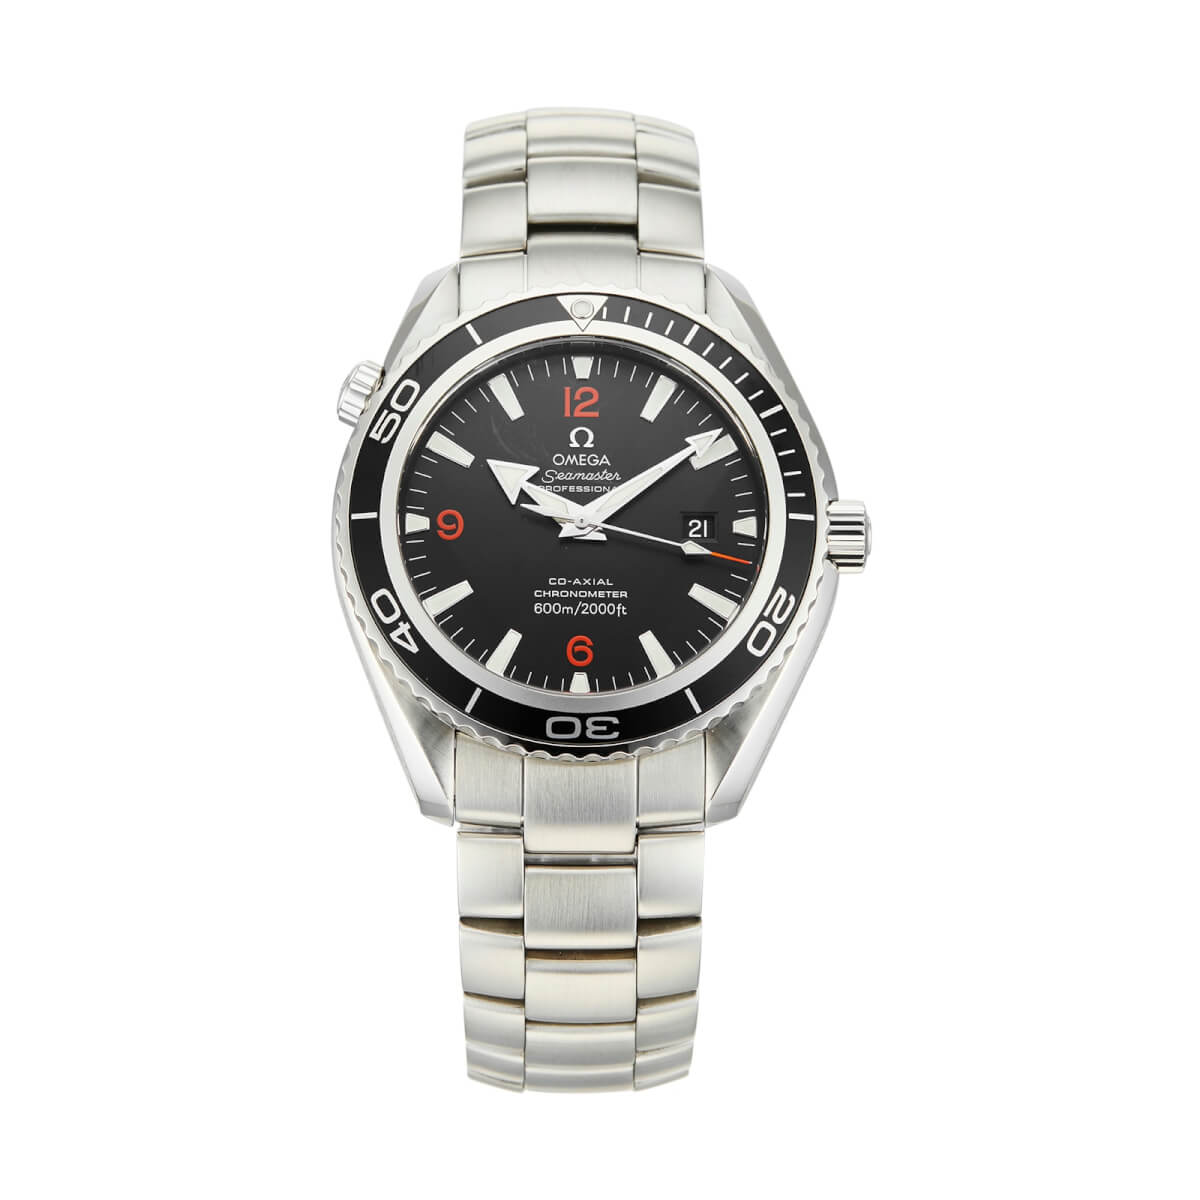 Pre-Owned OMEGA Seamaster Planet Ocean Big Size Mens Watch 2200.51.00